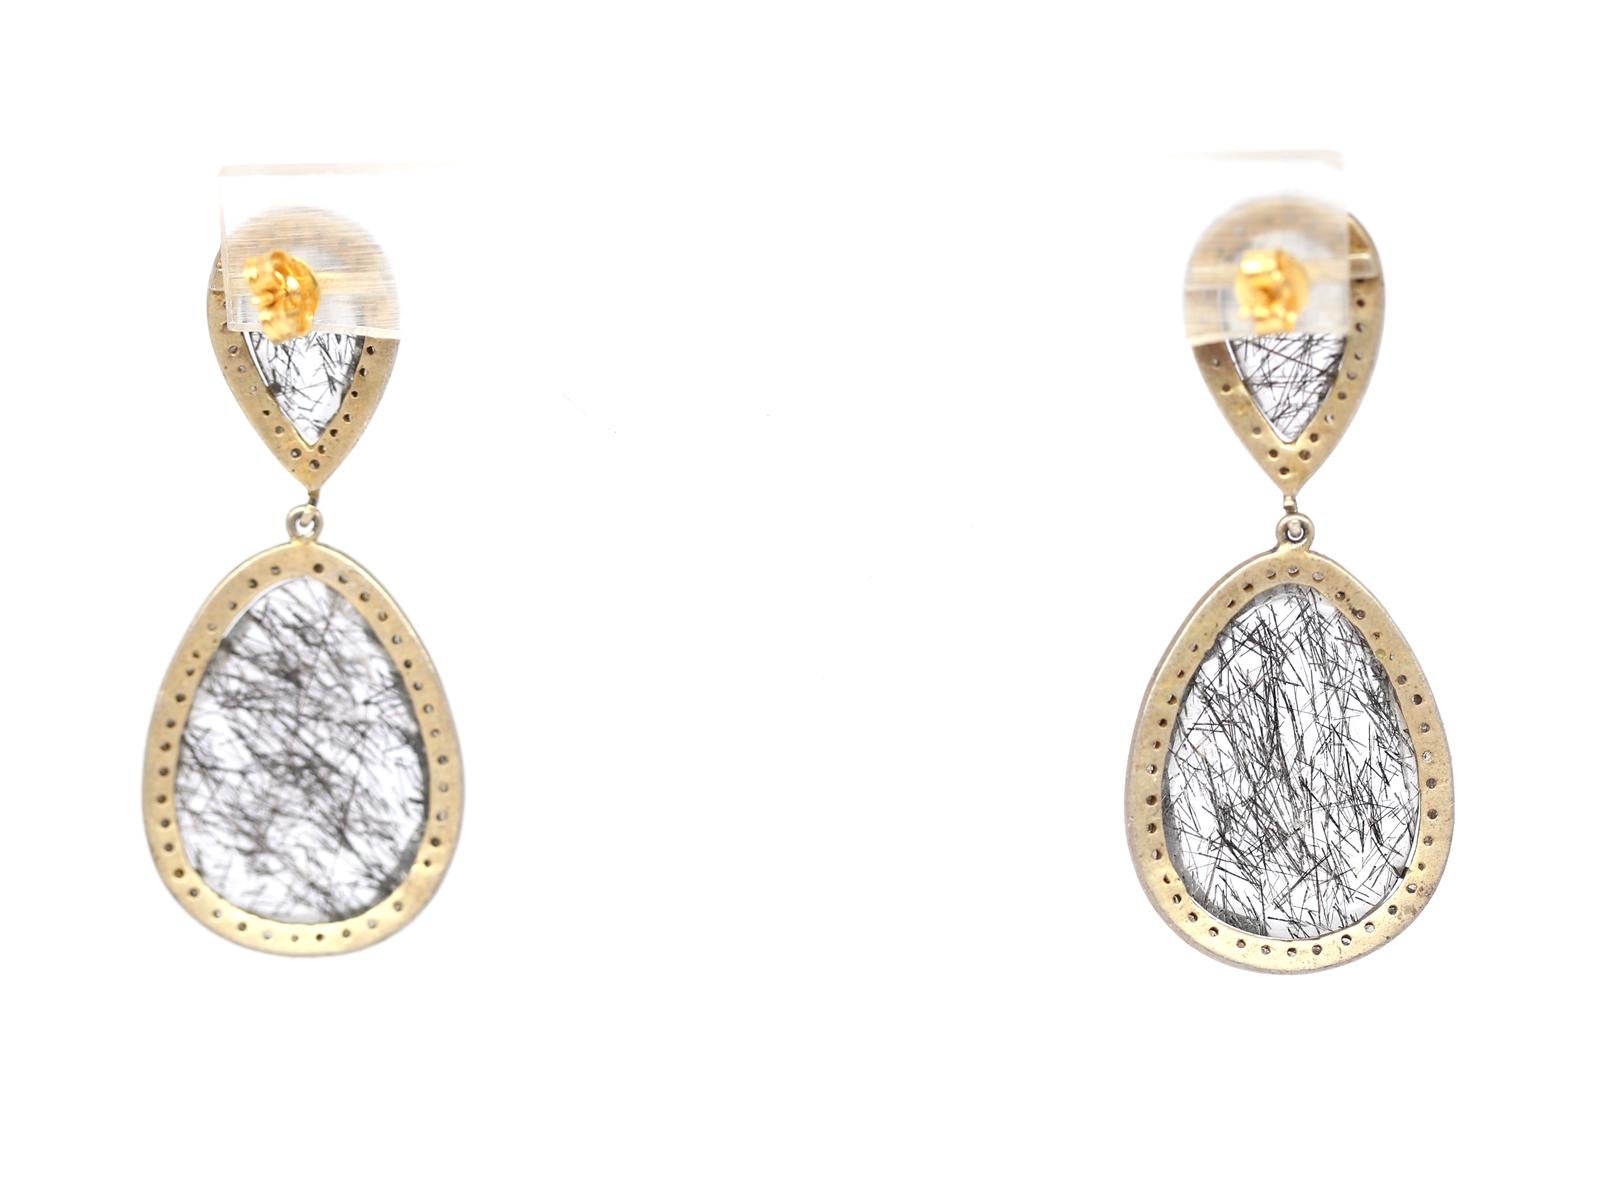 Earrings with Hairy Stone Gold Silver Rose-Cut Diamonds, 1970 For Sale 1